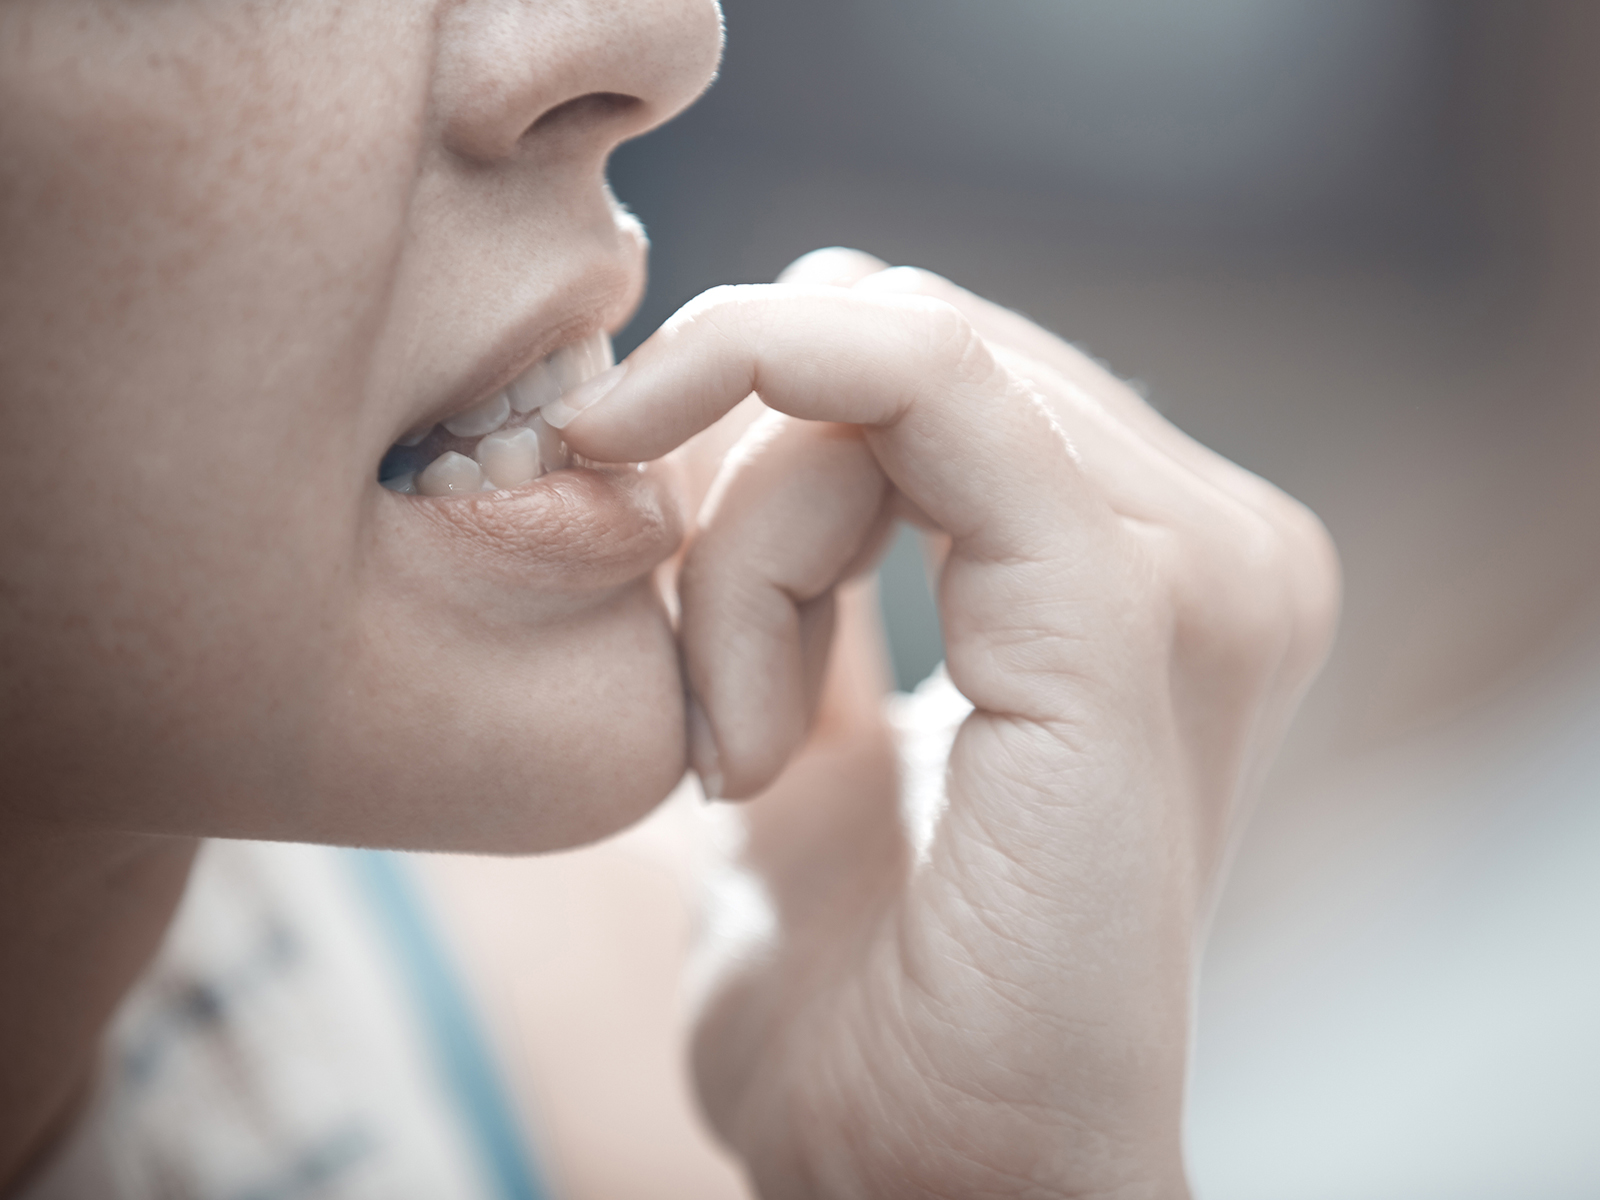 Are These Bad Habits Ruining Your Dental Health?